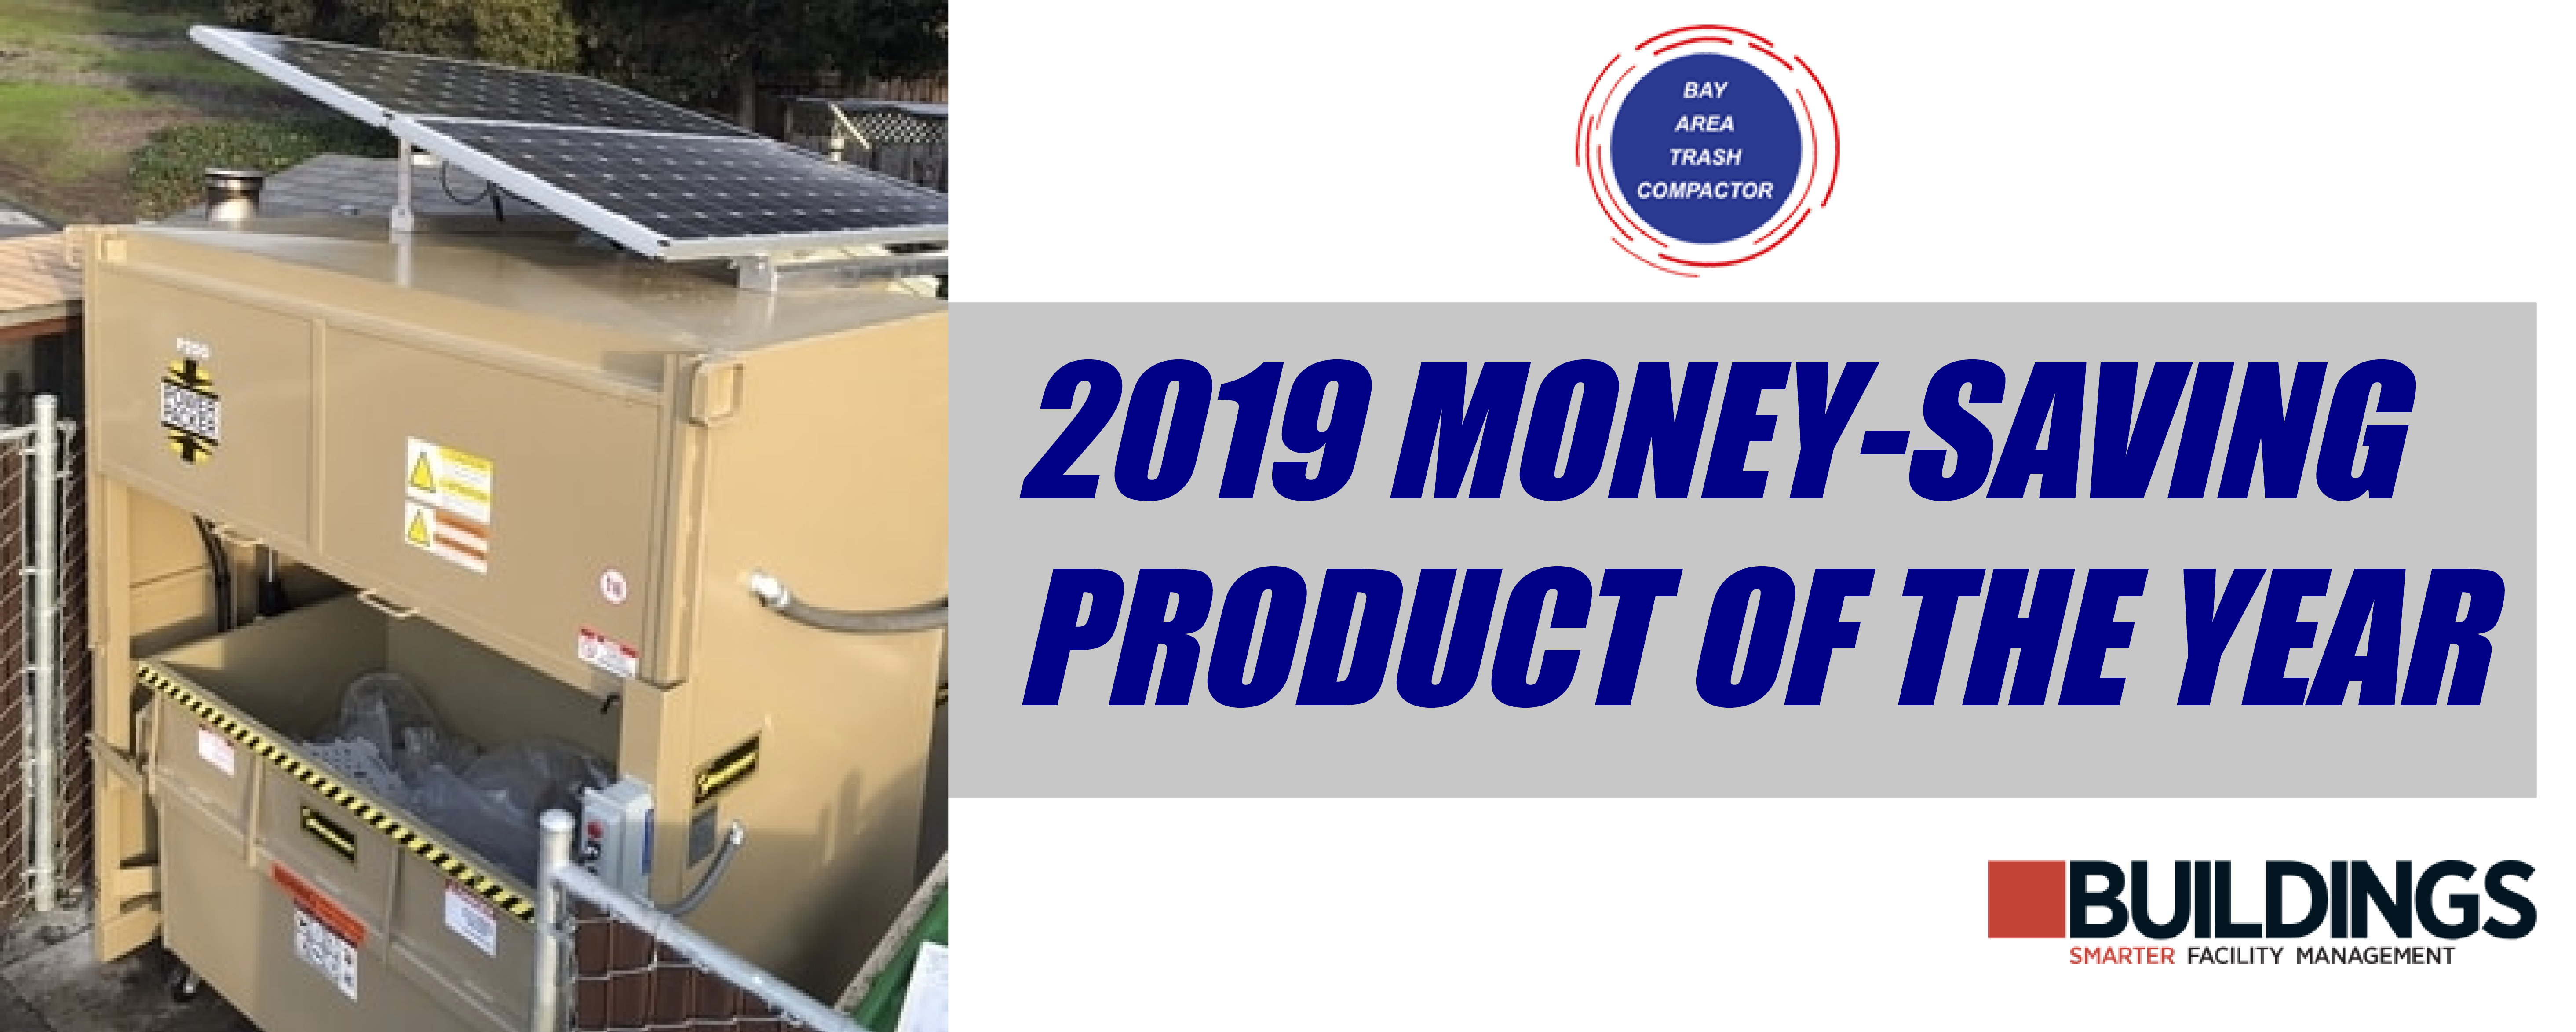 P200 Vertical Compactor Top Money-Saving Product of 2019